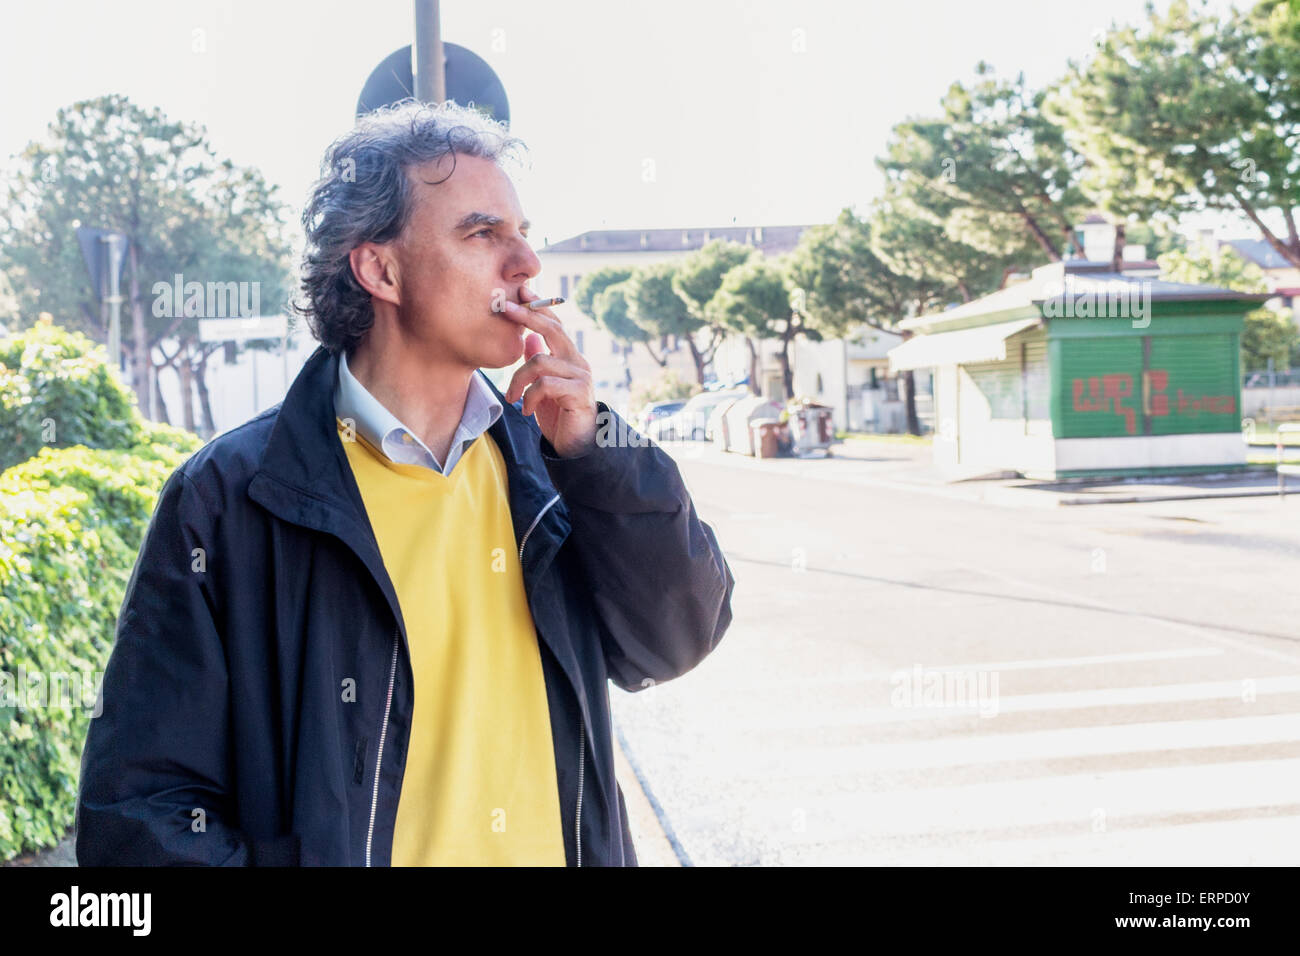 Handsome middle-aged man with salt pepper hair, medium hair, dressed in casual clothing with yellow sweater, slacks blue and yellow sneakers in green outdoors: he is smoking a cigarette Stock Photo